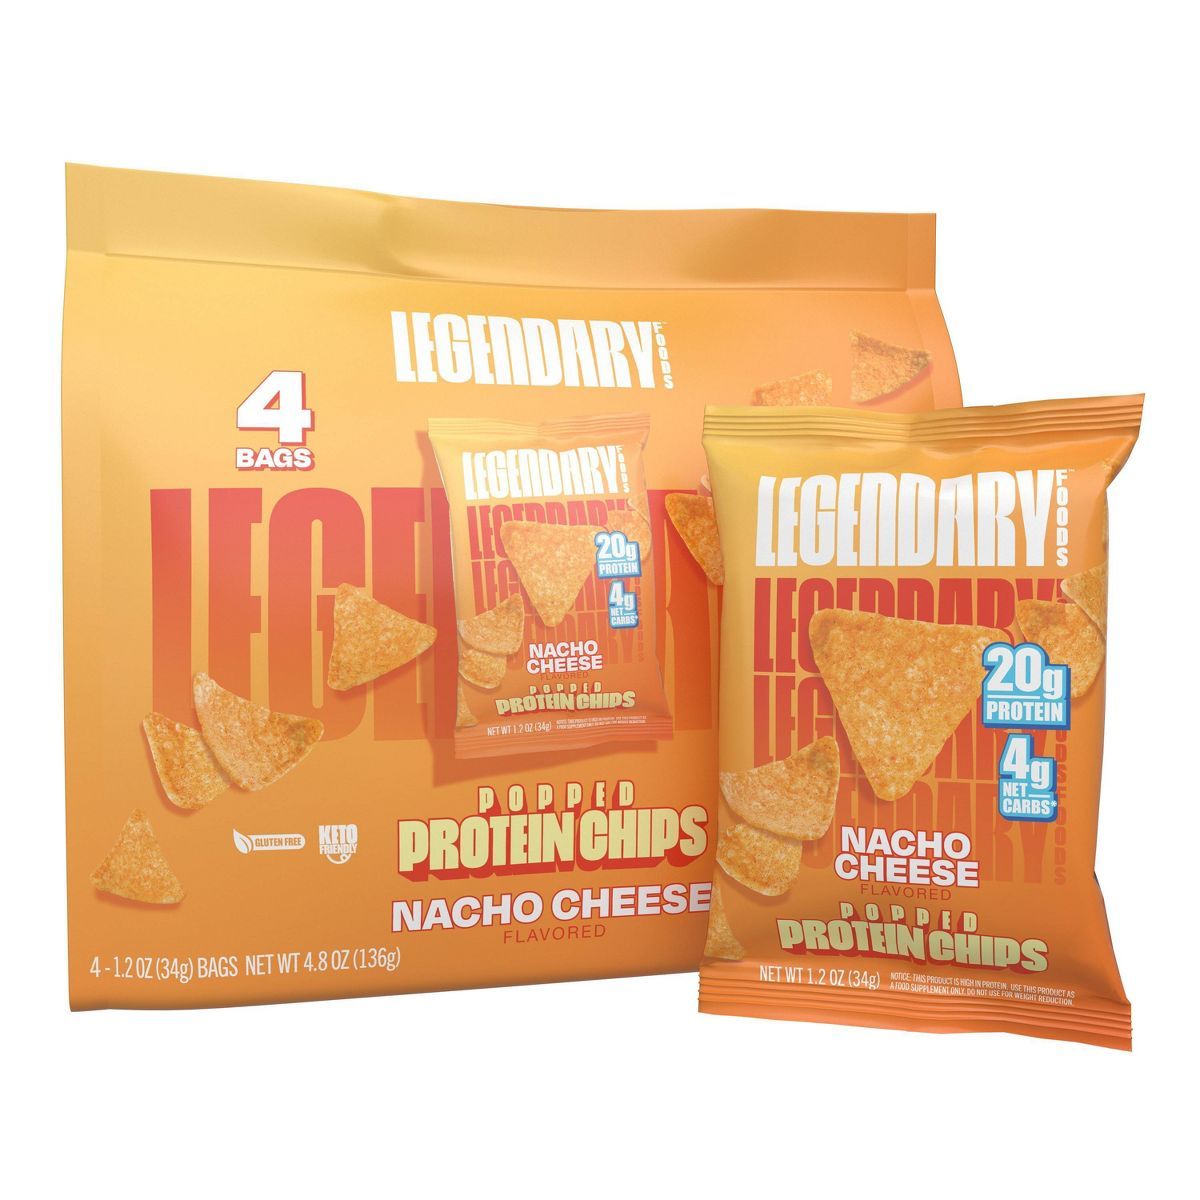 Legendary Foods Popped Chips - Nacho Cheese - 4.8oz | Target